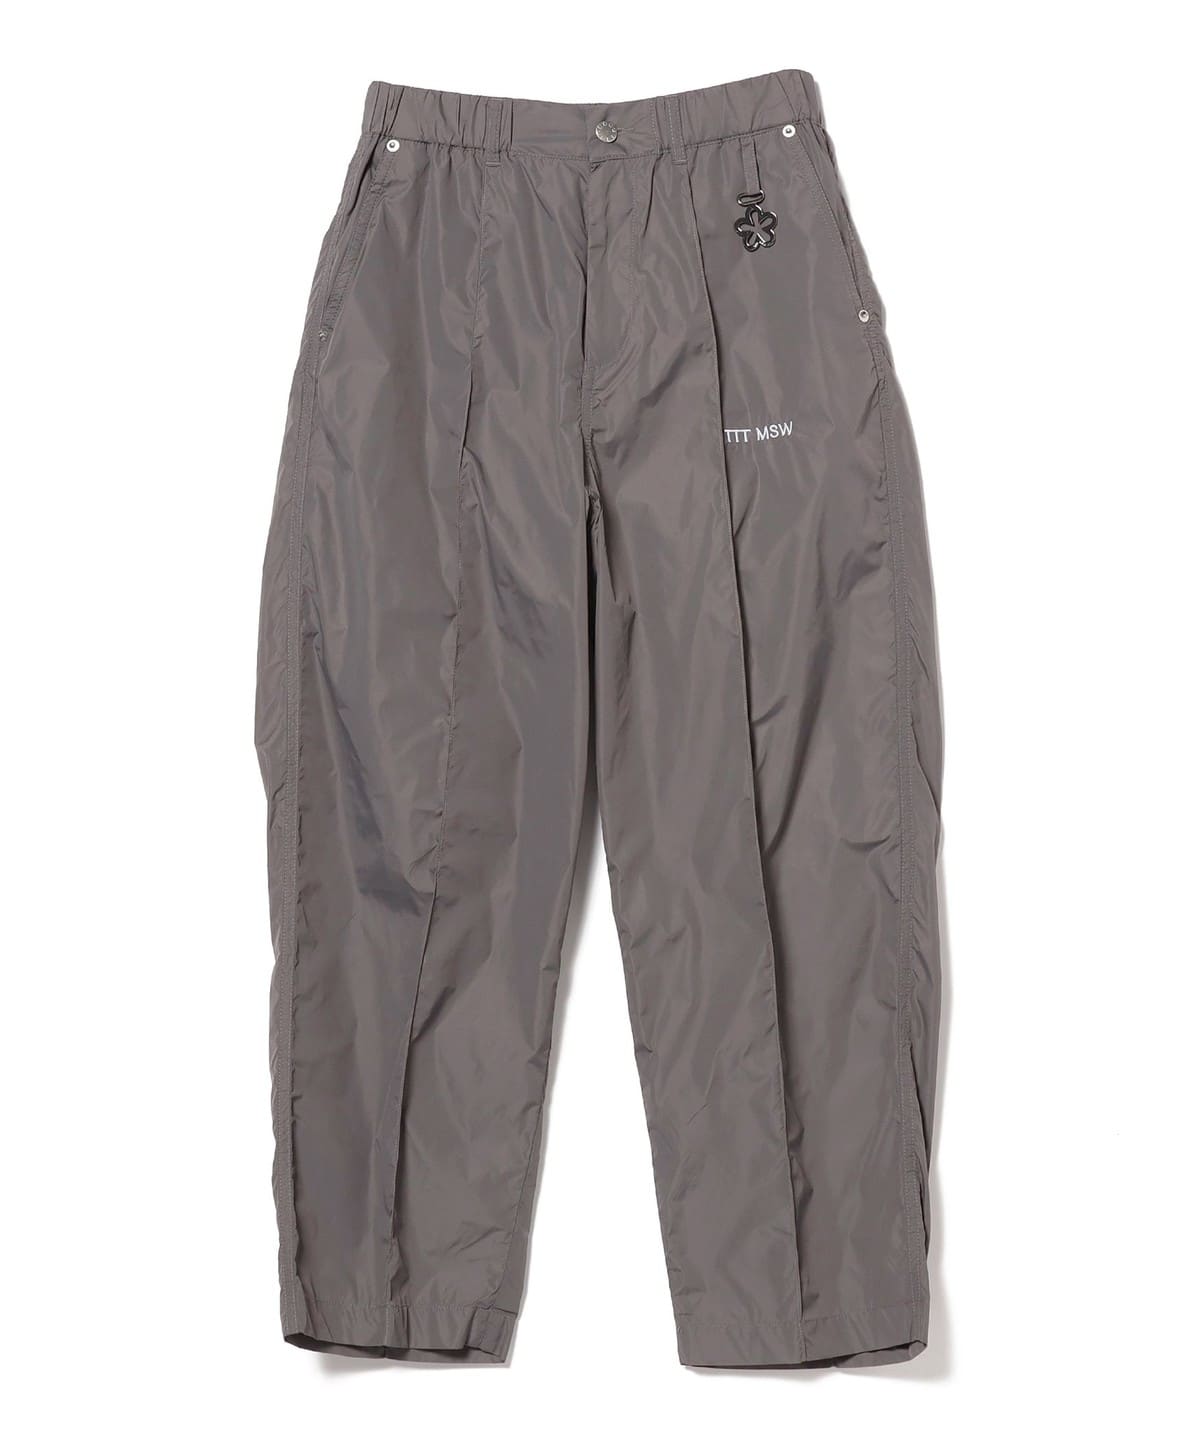 Ray BEAMS（レイ ビームス）〇TTT_MSW / New Standard Wide Pants 